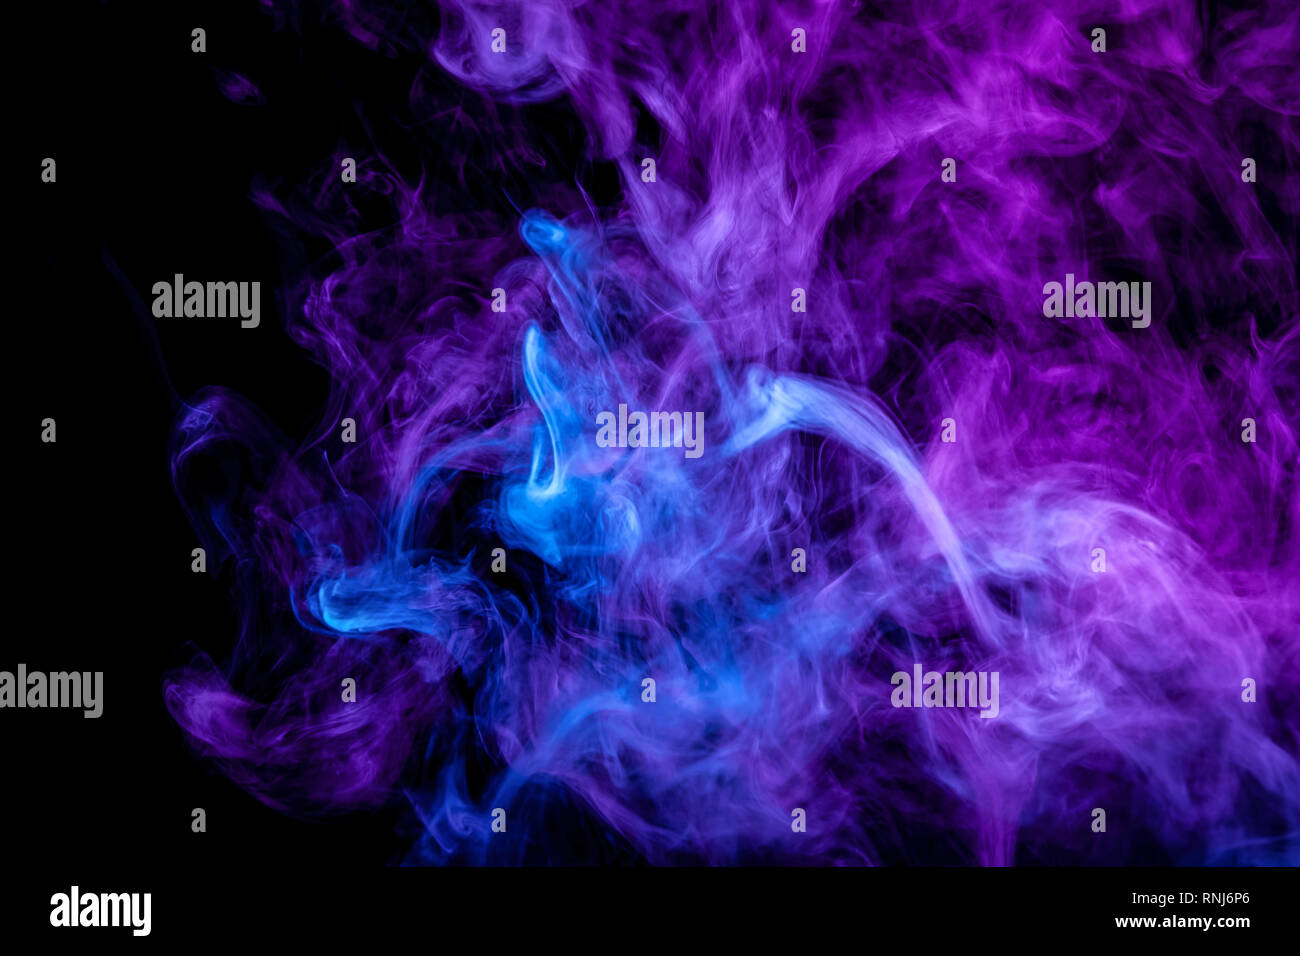 Frozen abstract movement of explosion smoke multiple purple and blue ...